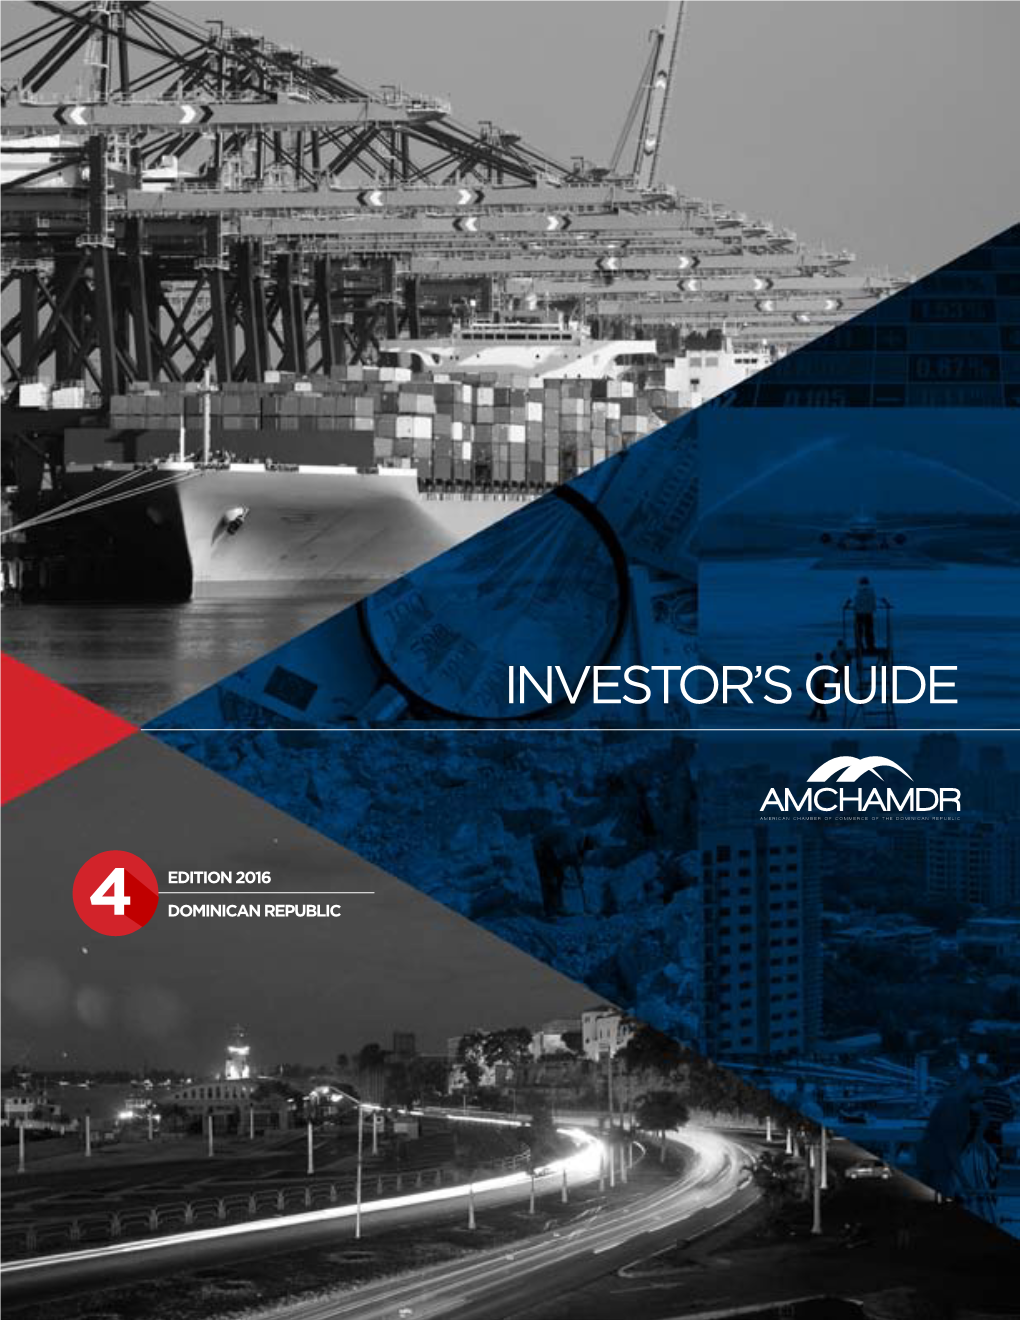 Investor's Guide to the Dominican Republic Is Published by the American Chamber of Commerce of the Dominican Republic (AMCHAMDR)